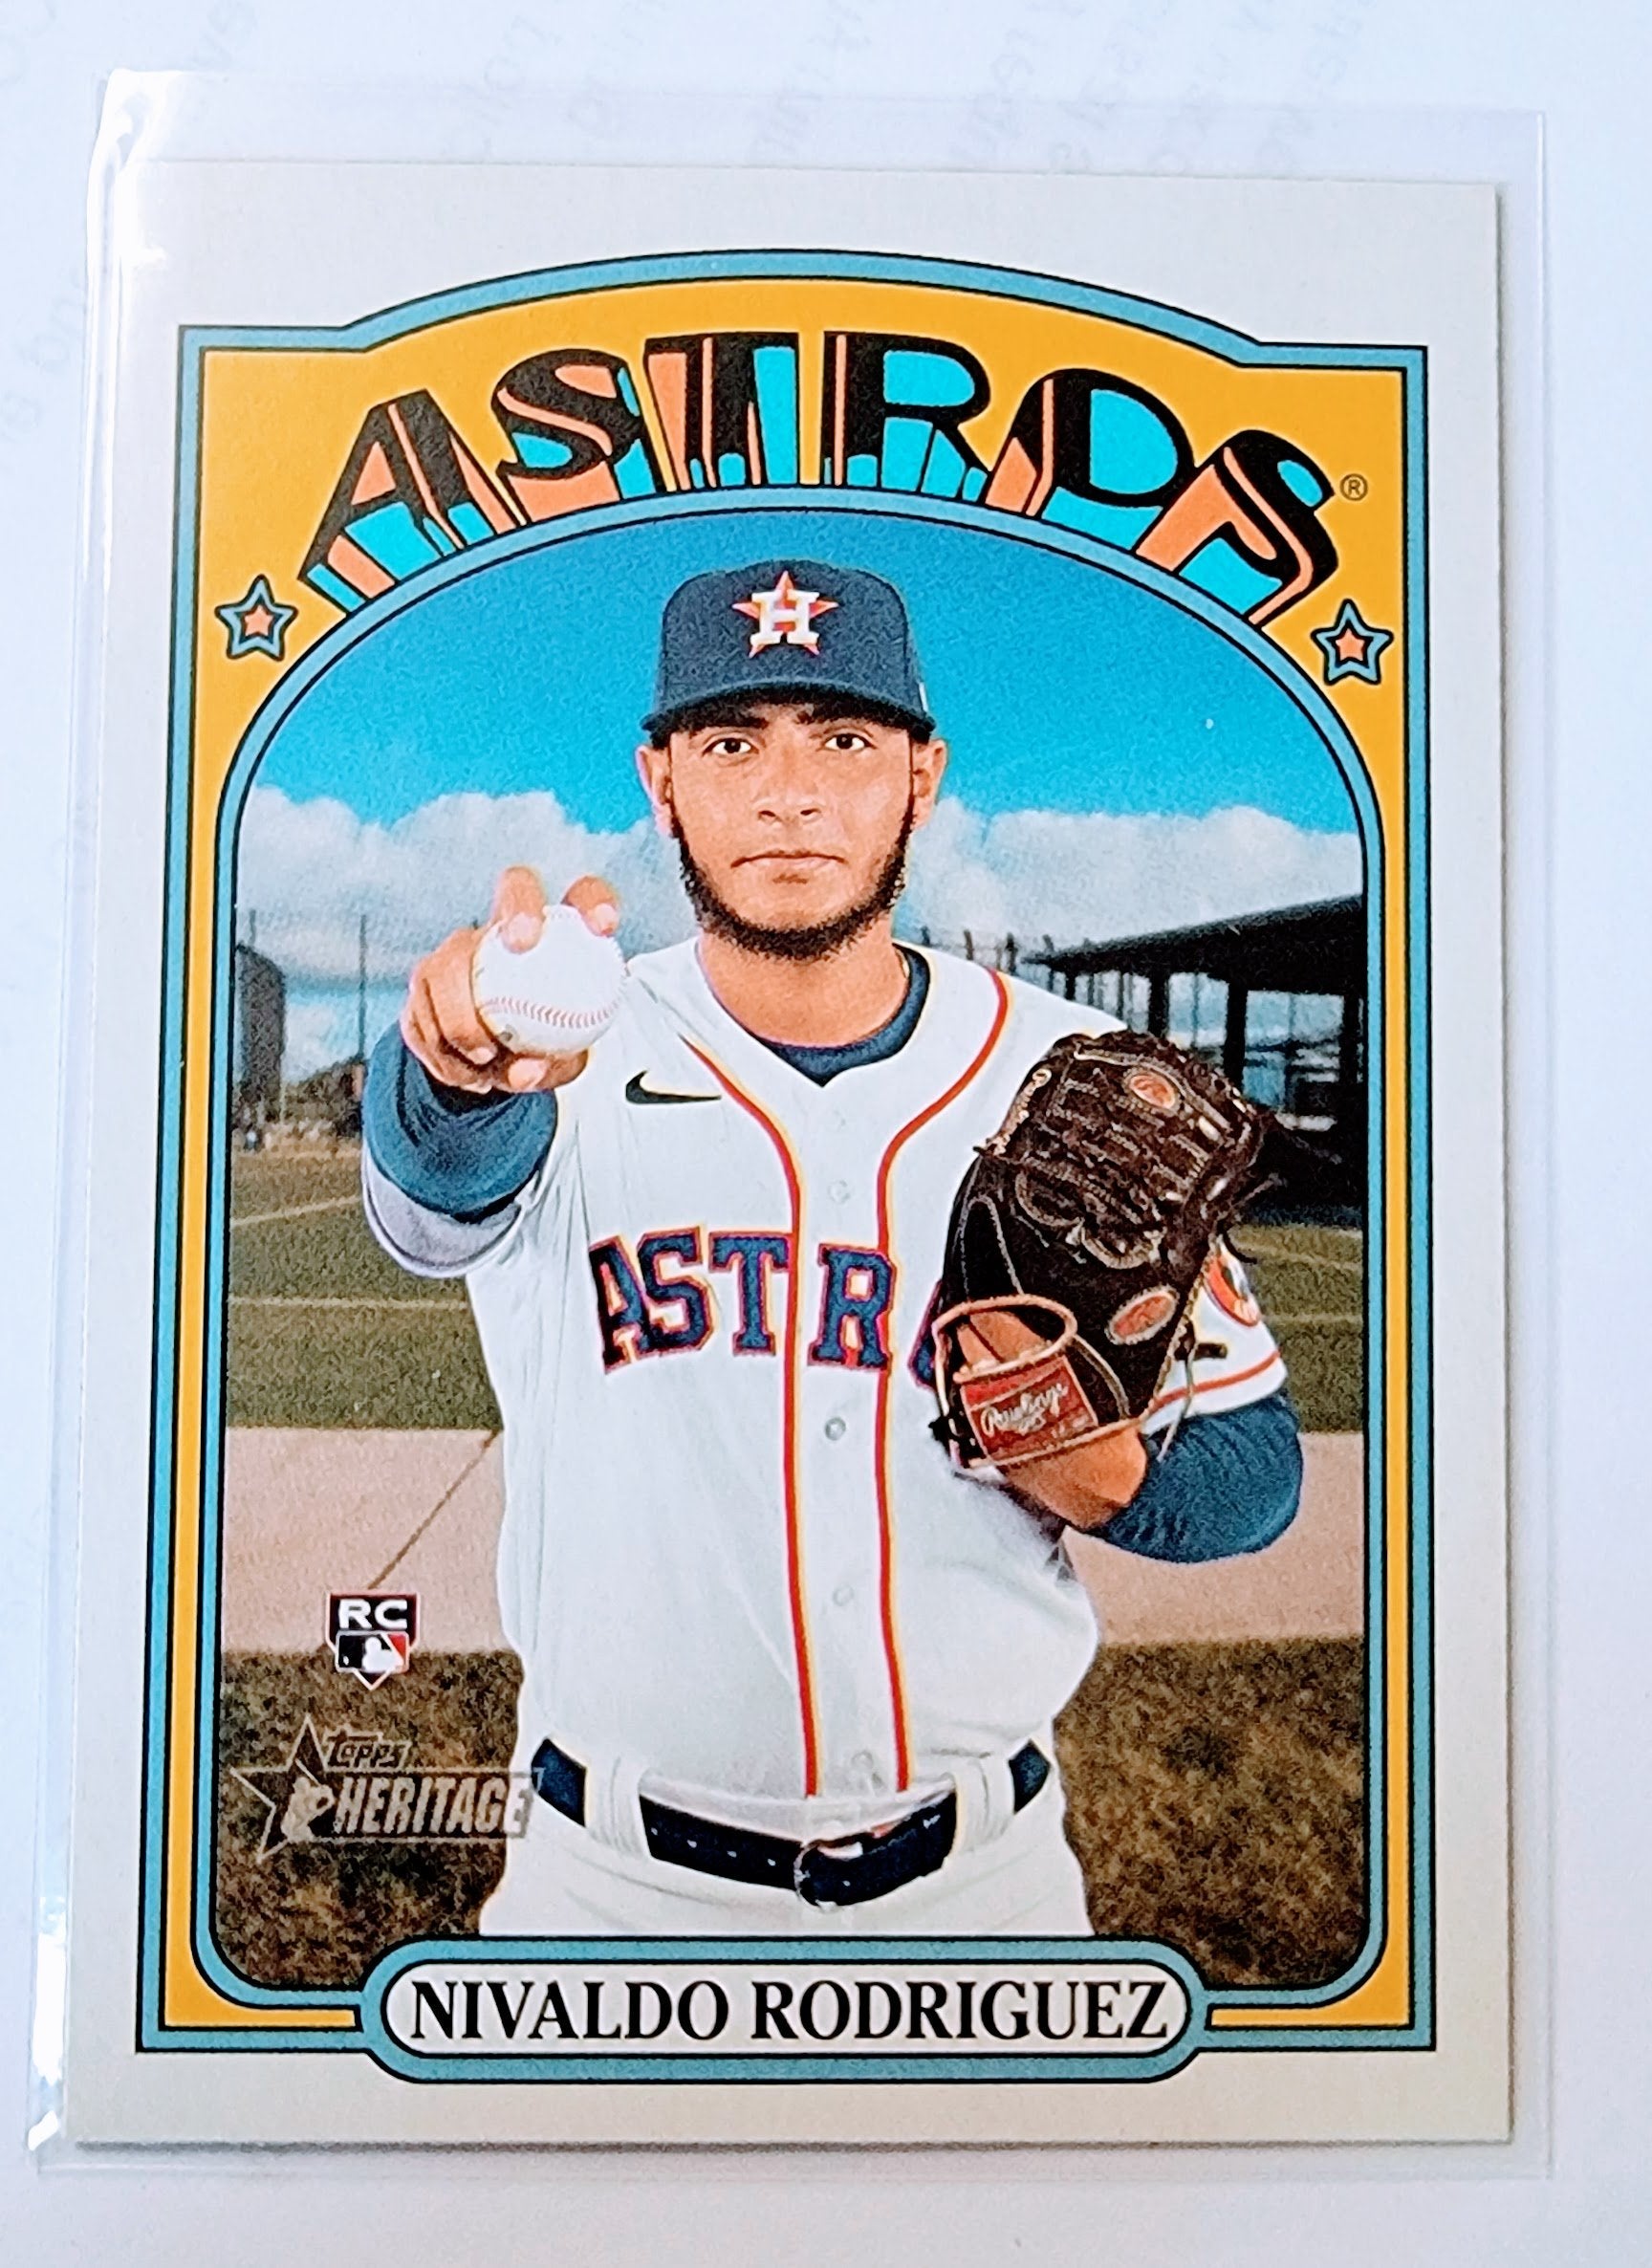 2021 Topps Heritage Nivaldo Rodriguez Rookie Baseball Trading Card MCSC1 simple Xclusive Collectibles   